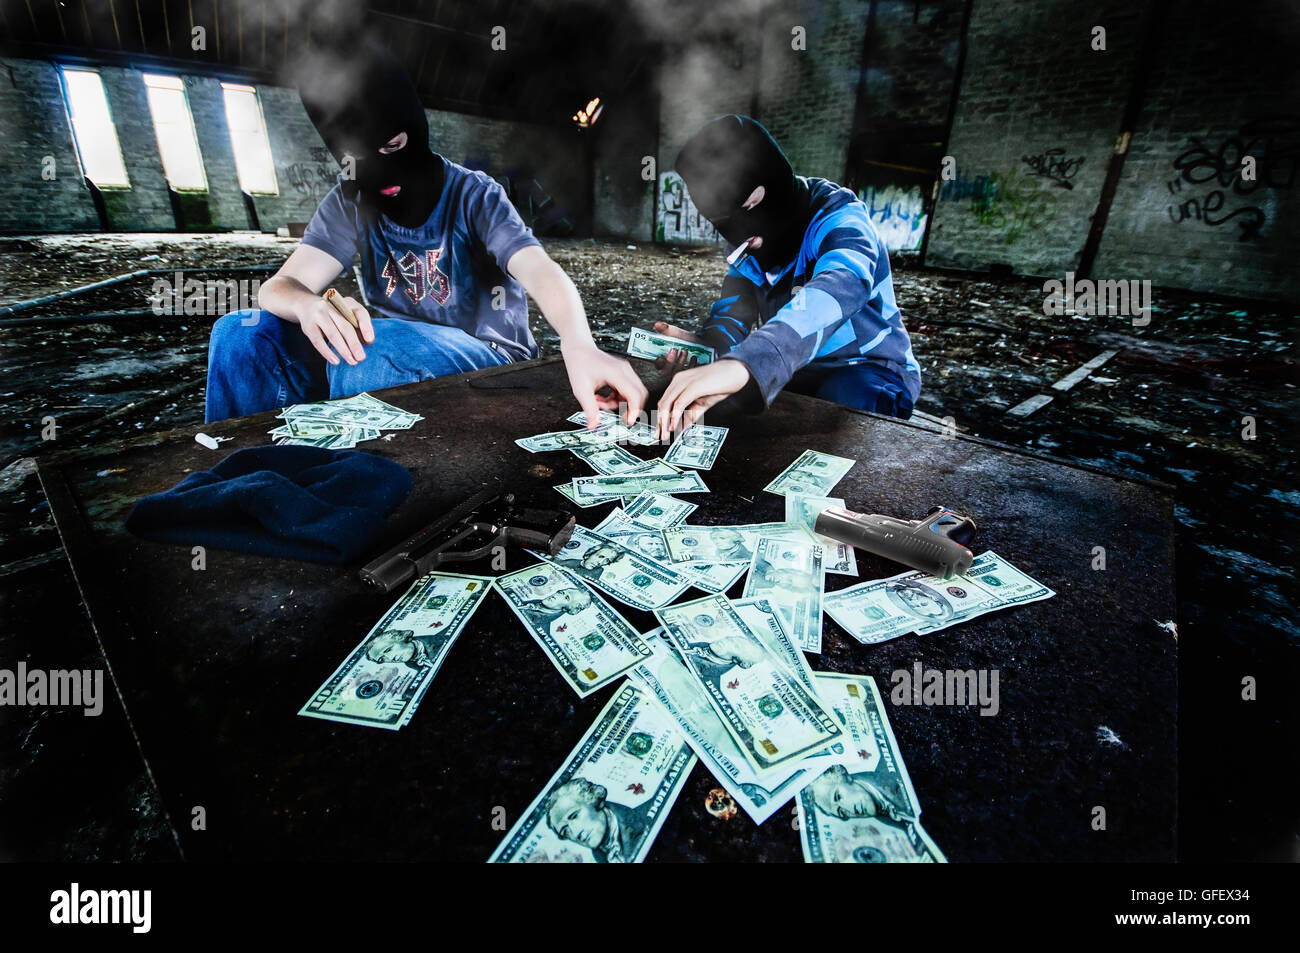 Two men wearing balaclavas count money after a robbery Stock Photo